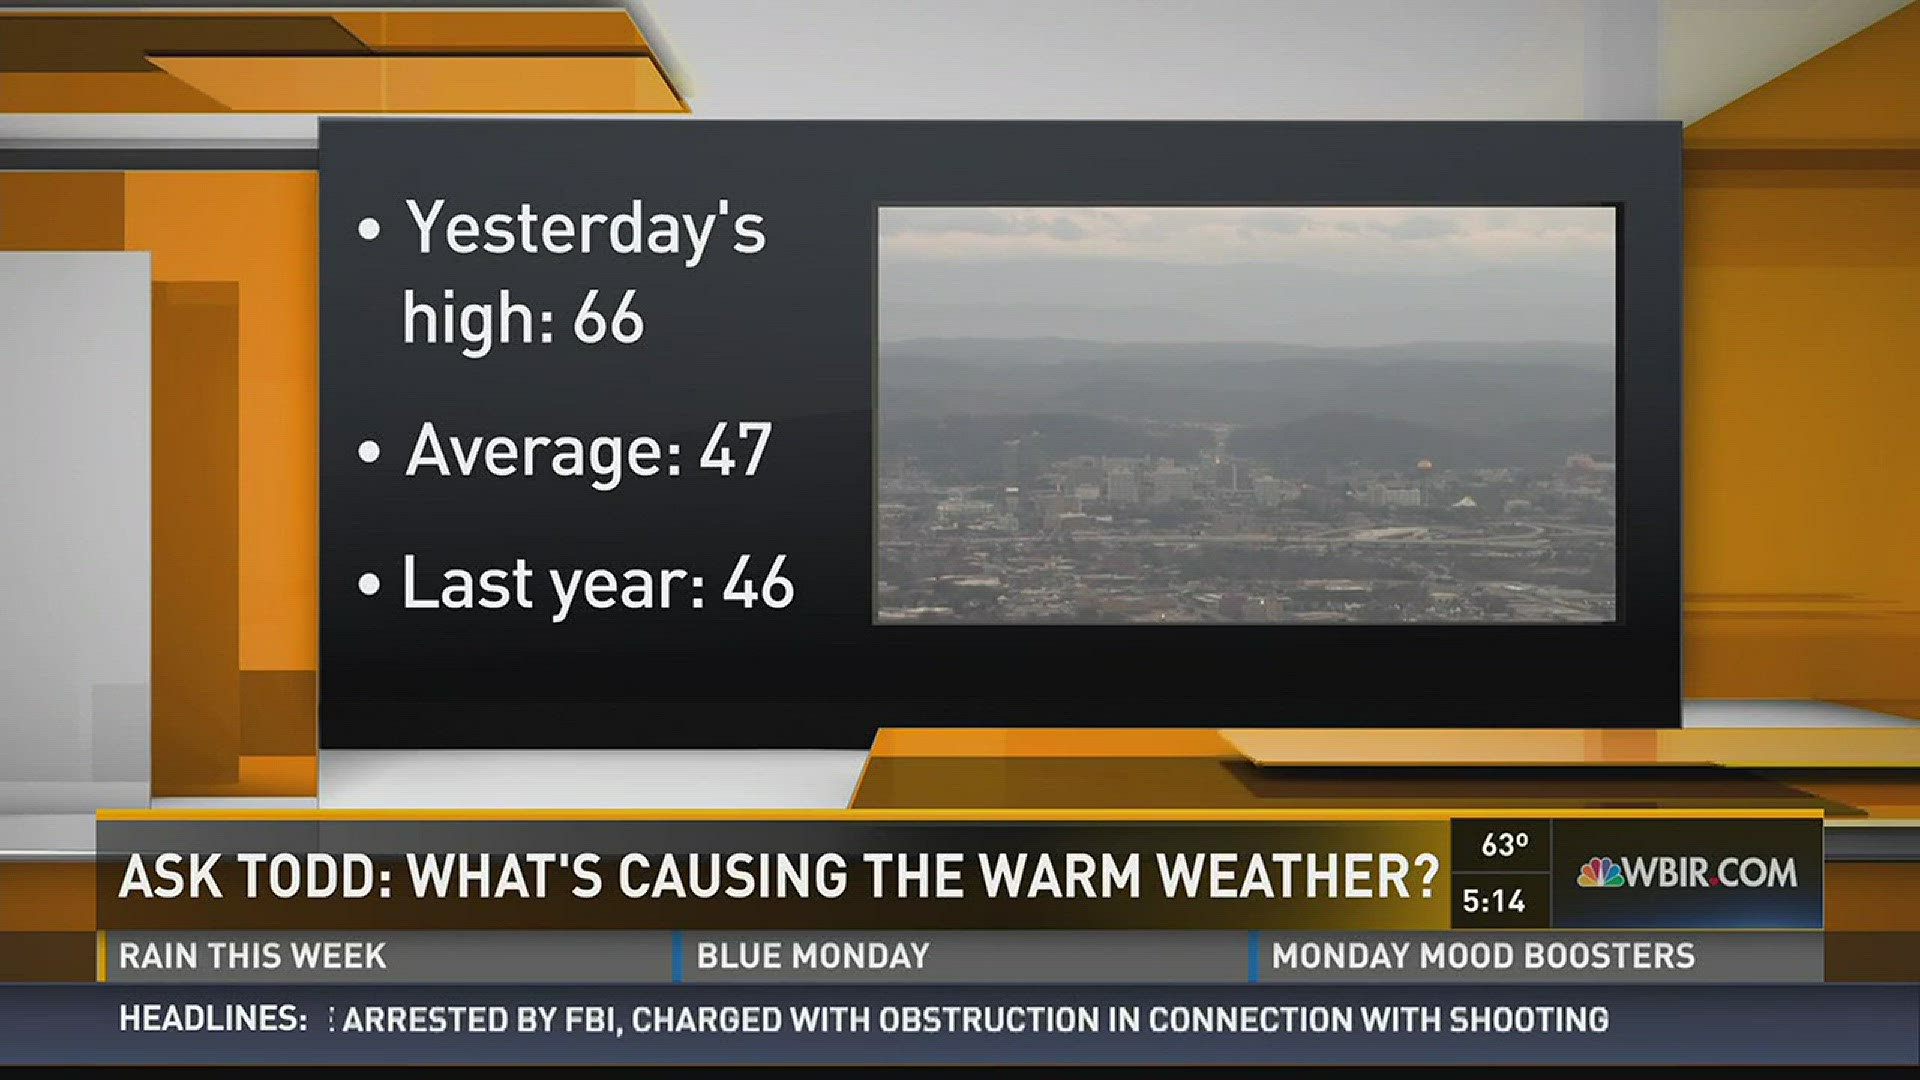 We are in the midst of an unusually long warm weather streak in January. Todd explains why.